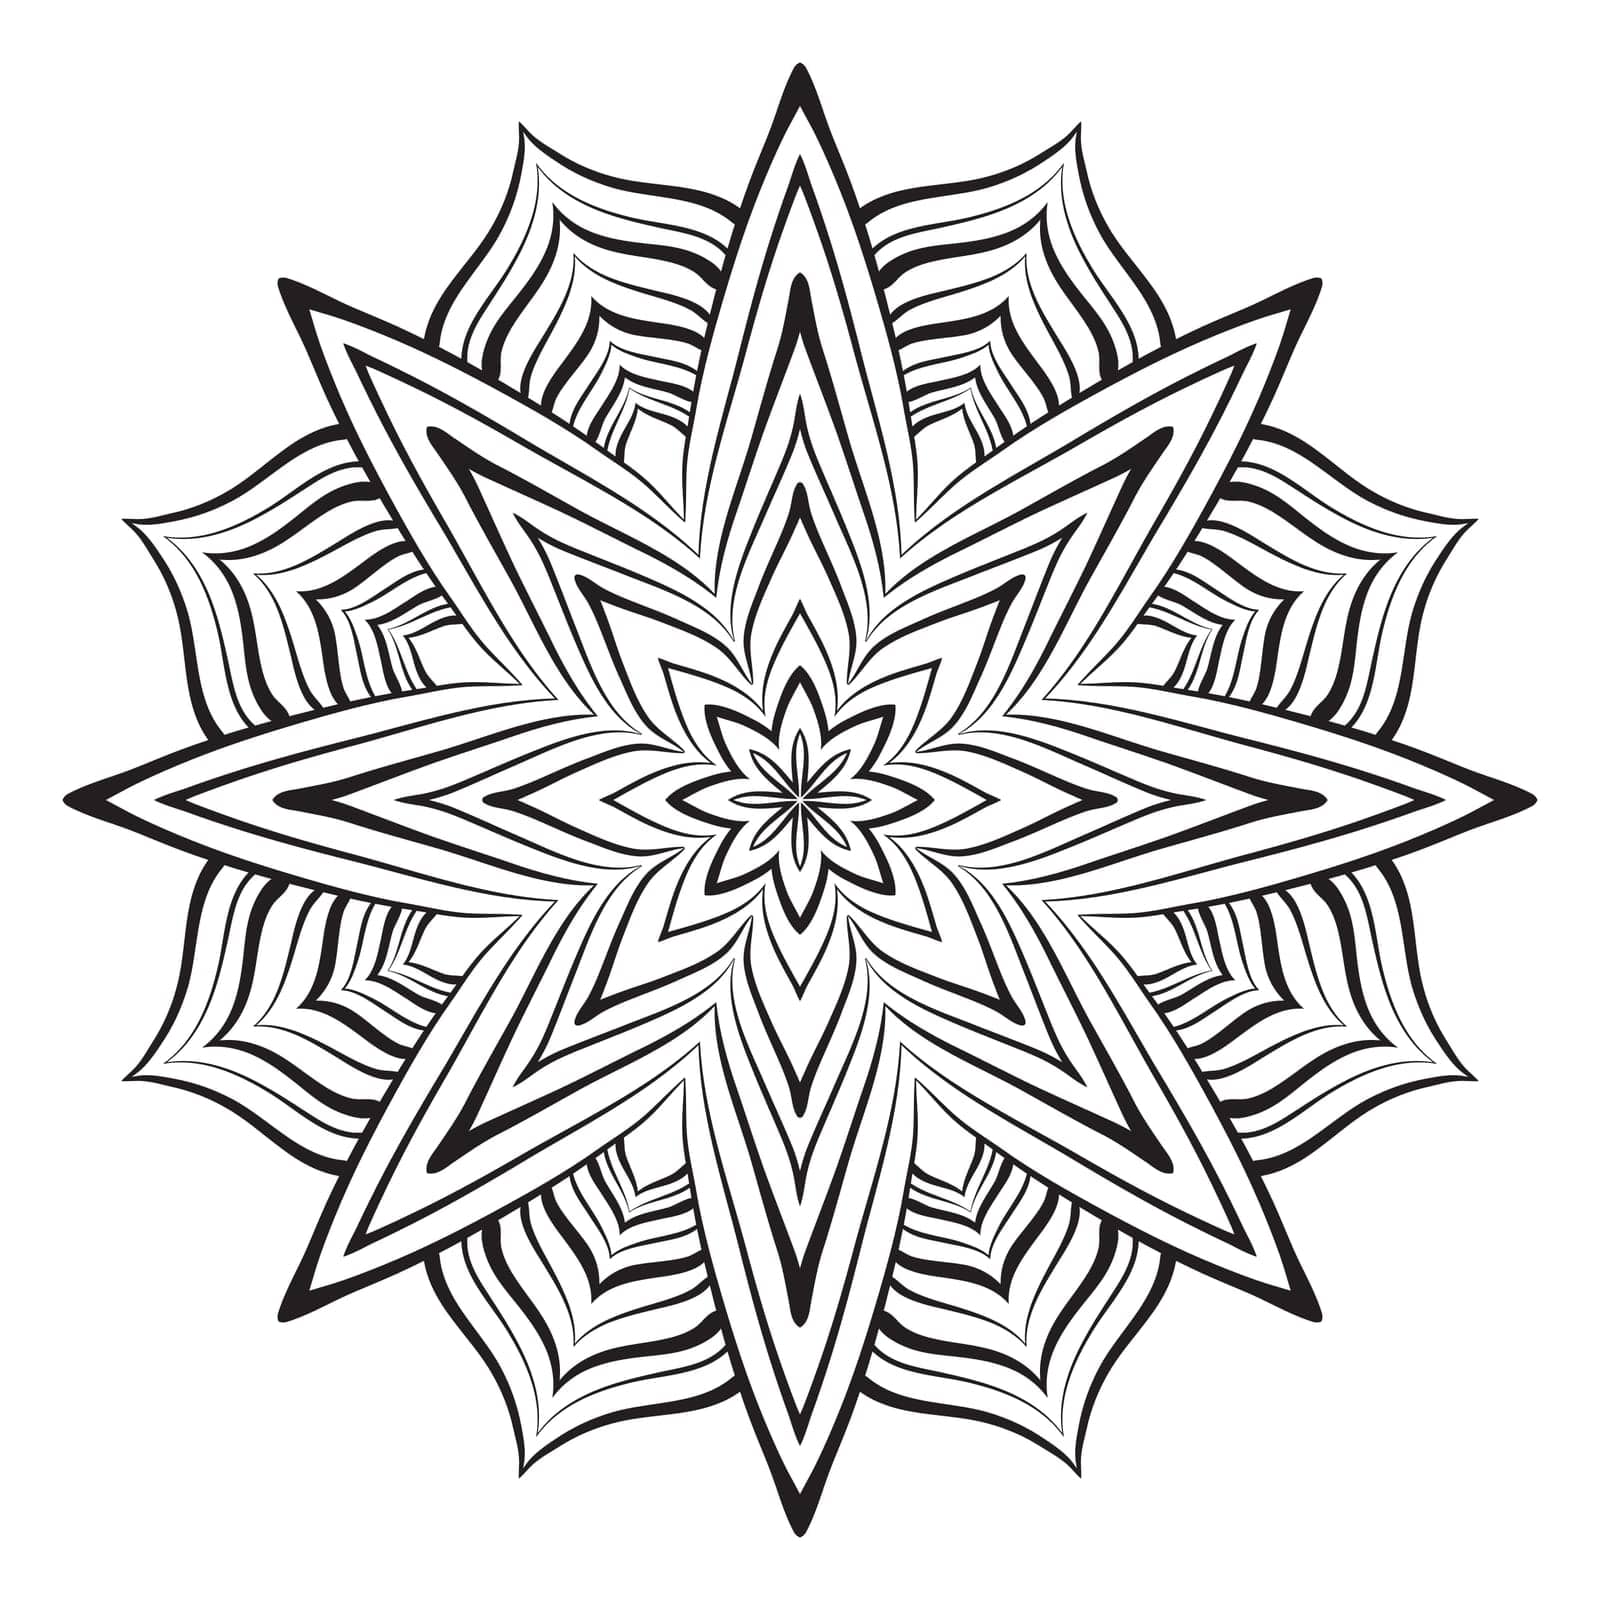 Flower mandala coloring page. Intricate symmetrical floral shape for mindful coloring. Black outline on white background